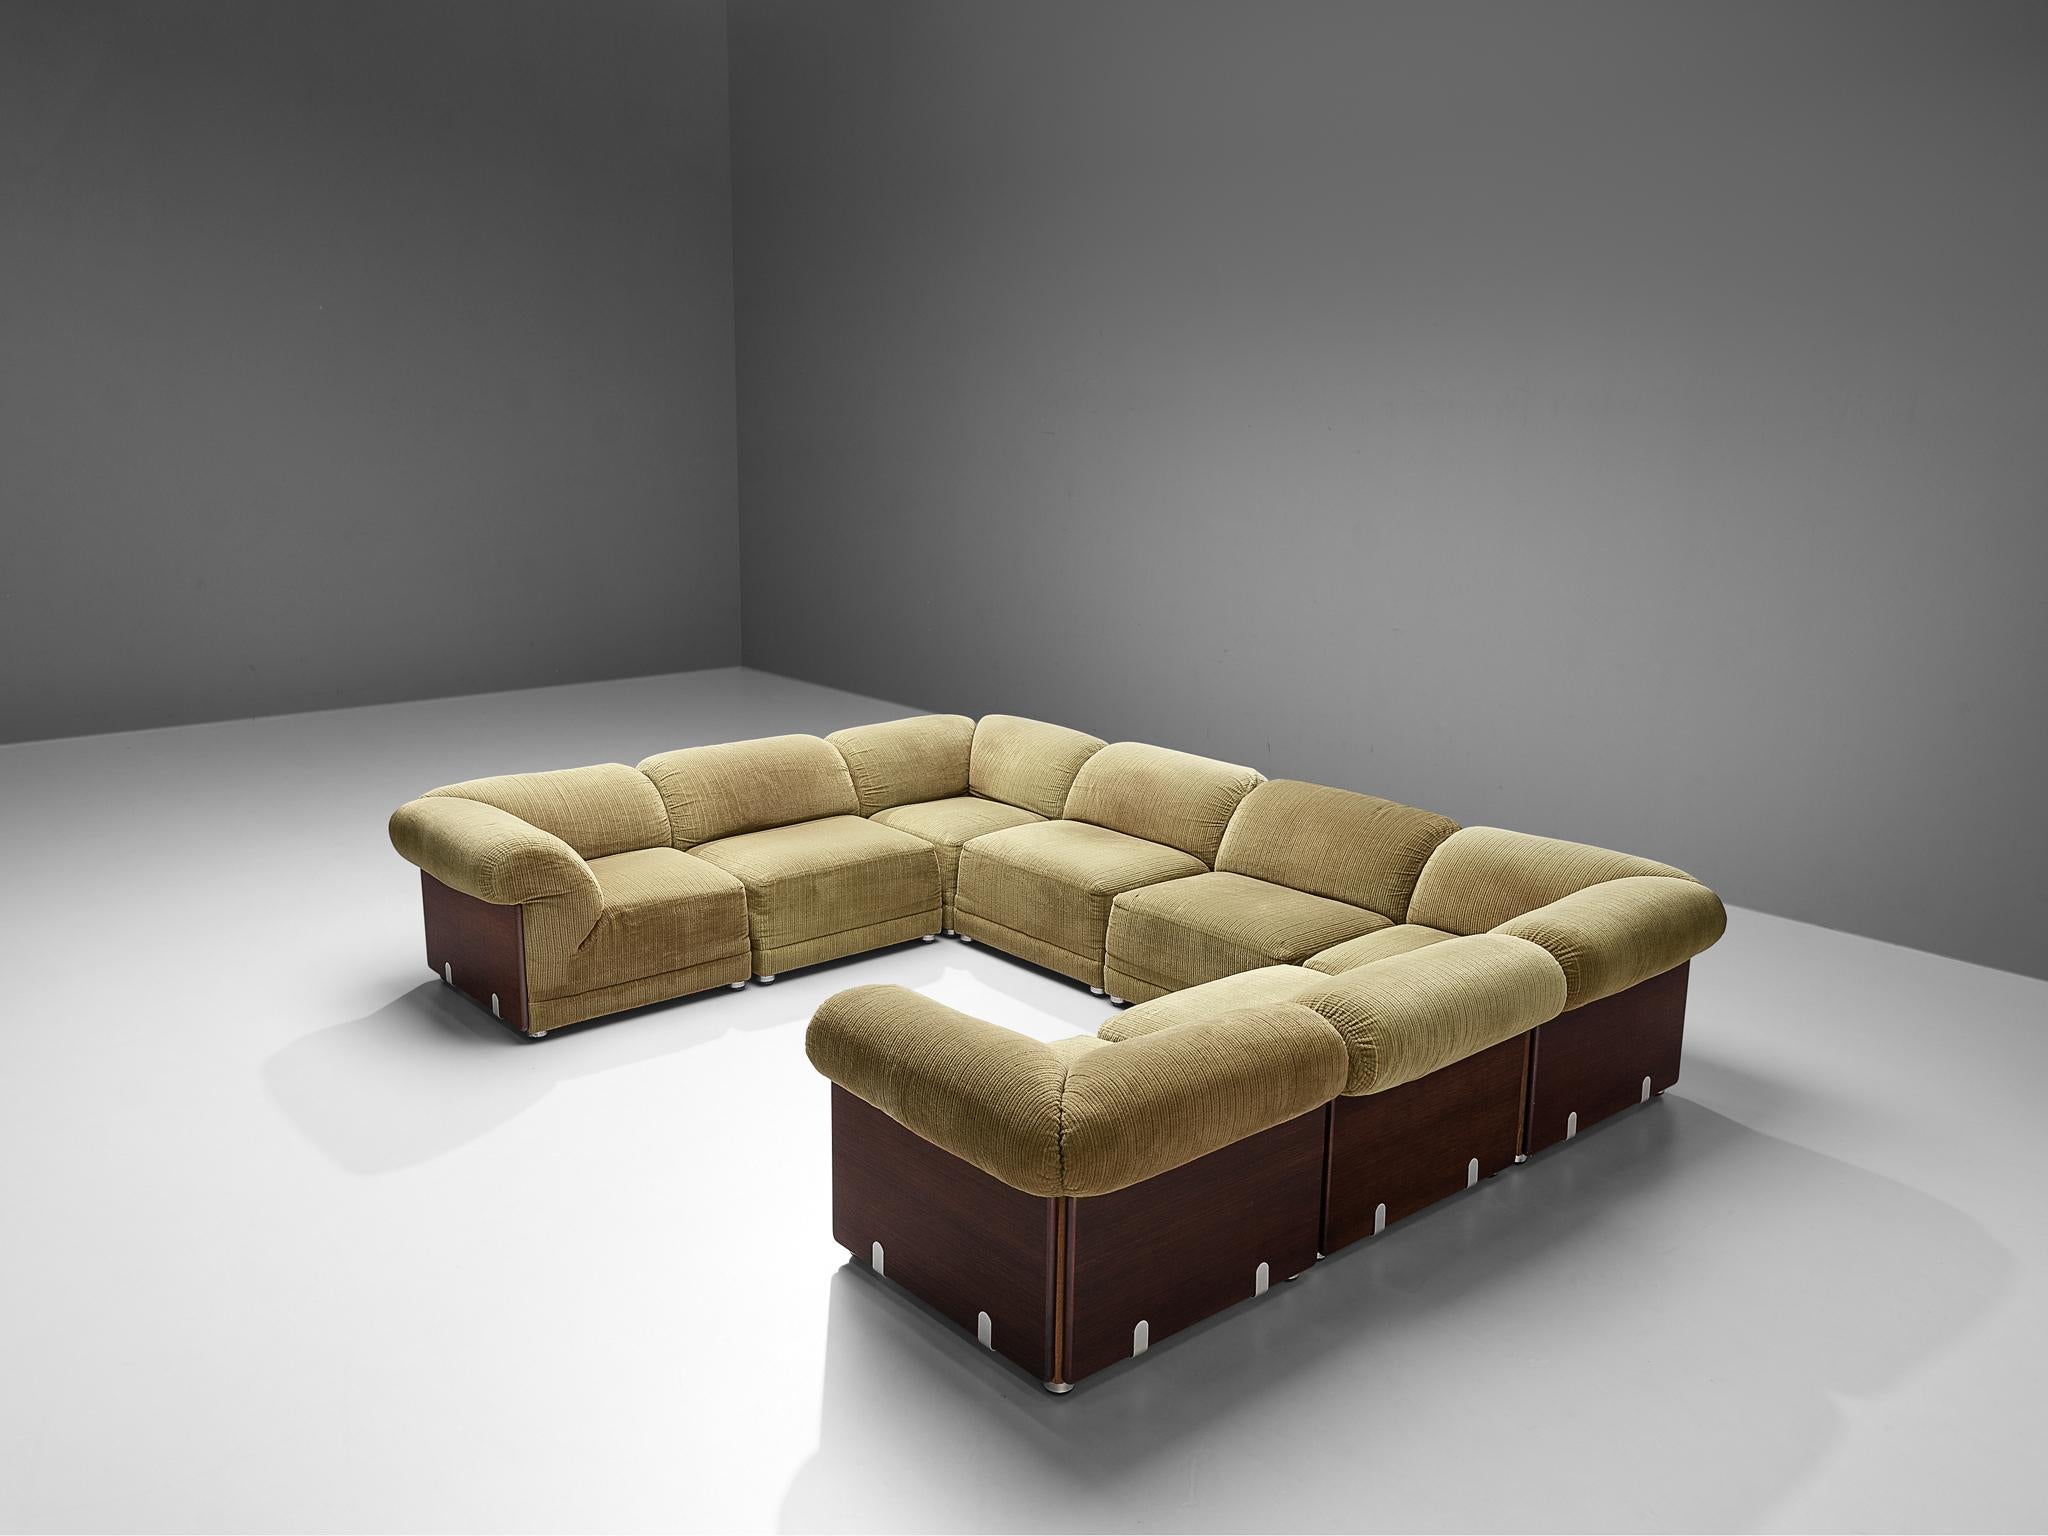 Sectional sofa, velvet upholstery, wood, metal, Italy, 1960s

With its eight seating elements, comfortable upholstery and two side tables this sectional sofa is highly versatile and adjustable to different situations. Four corner elements can be